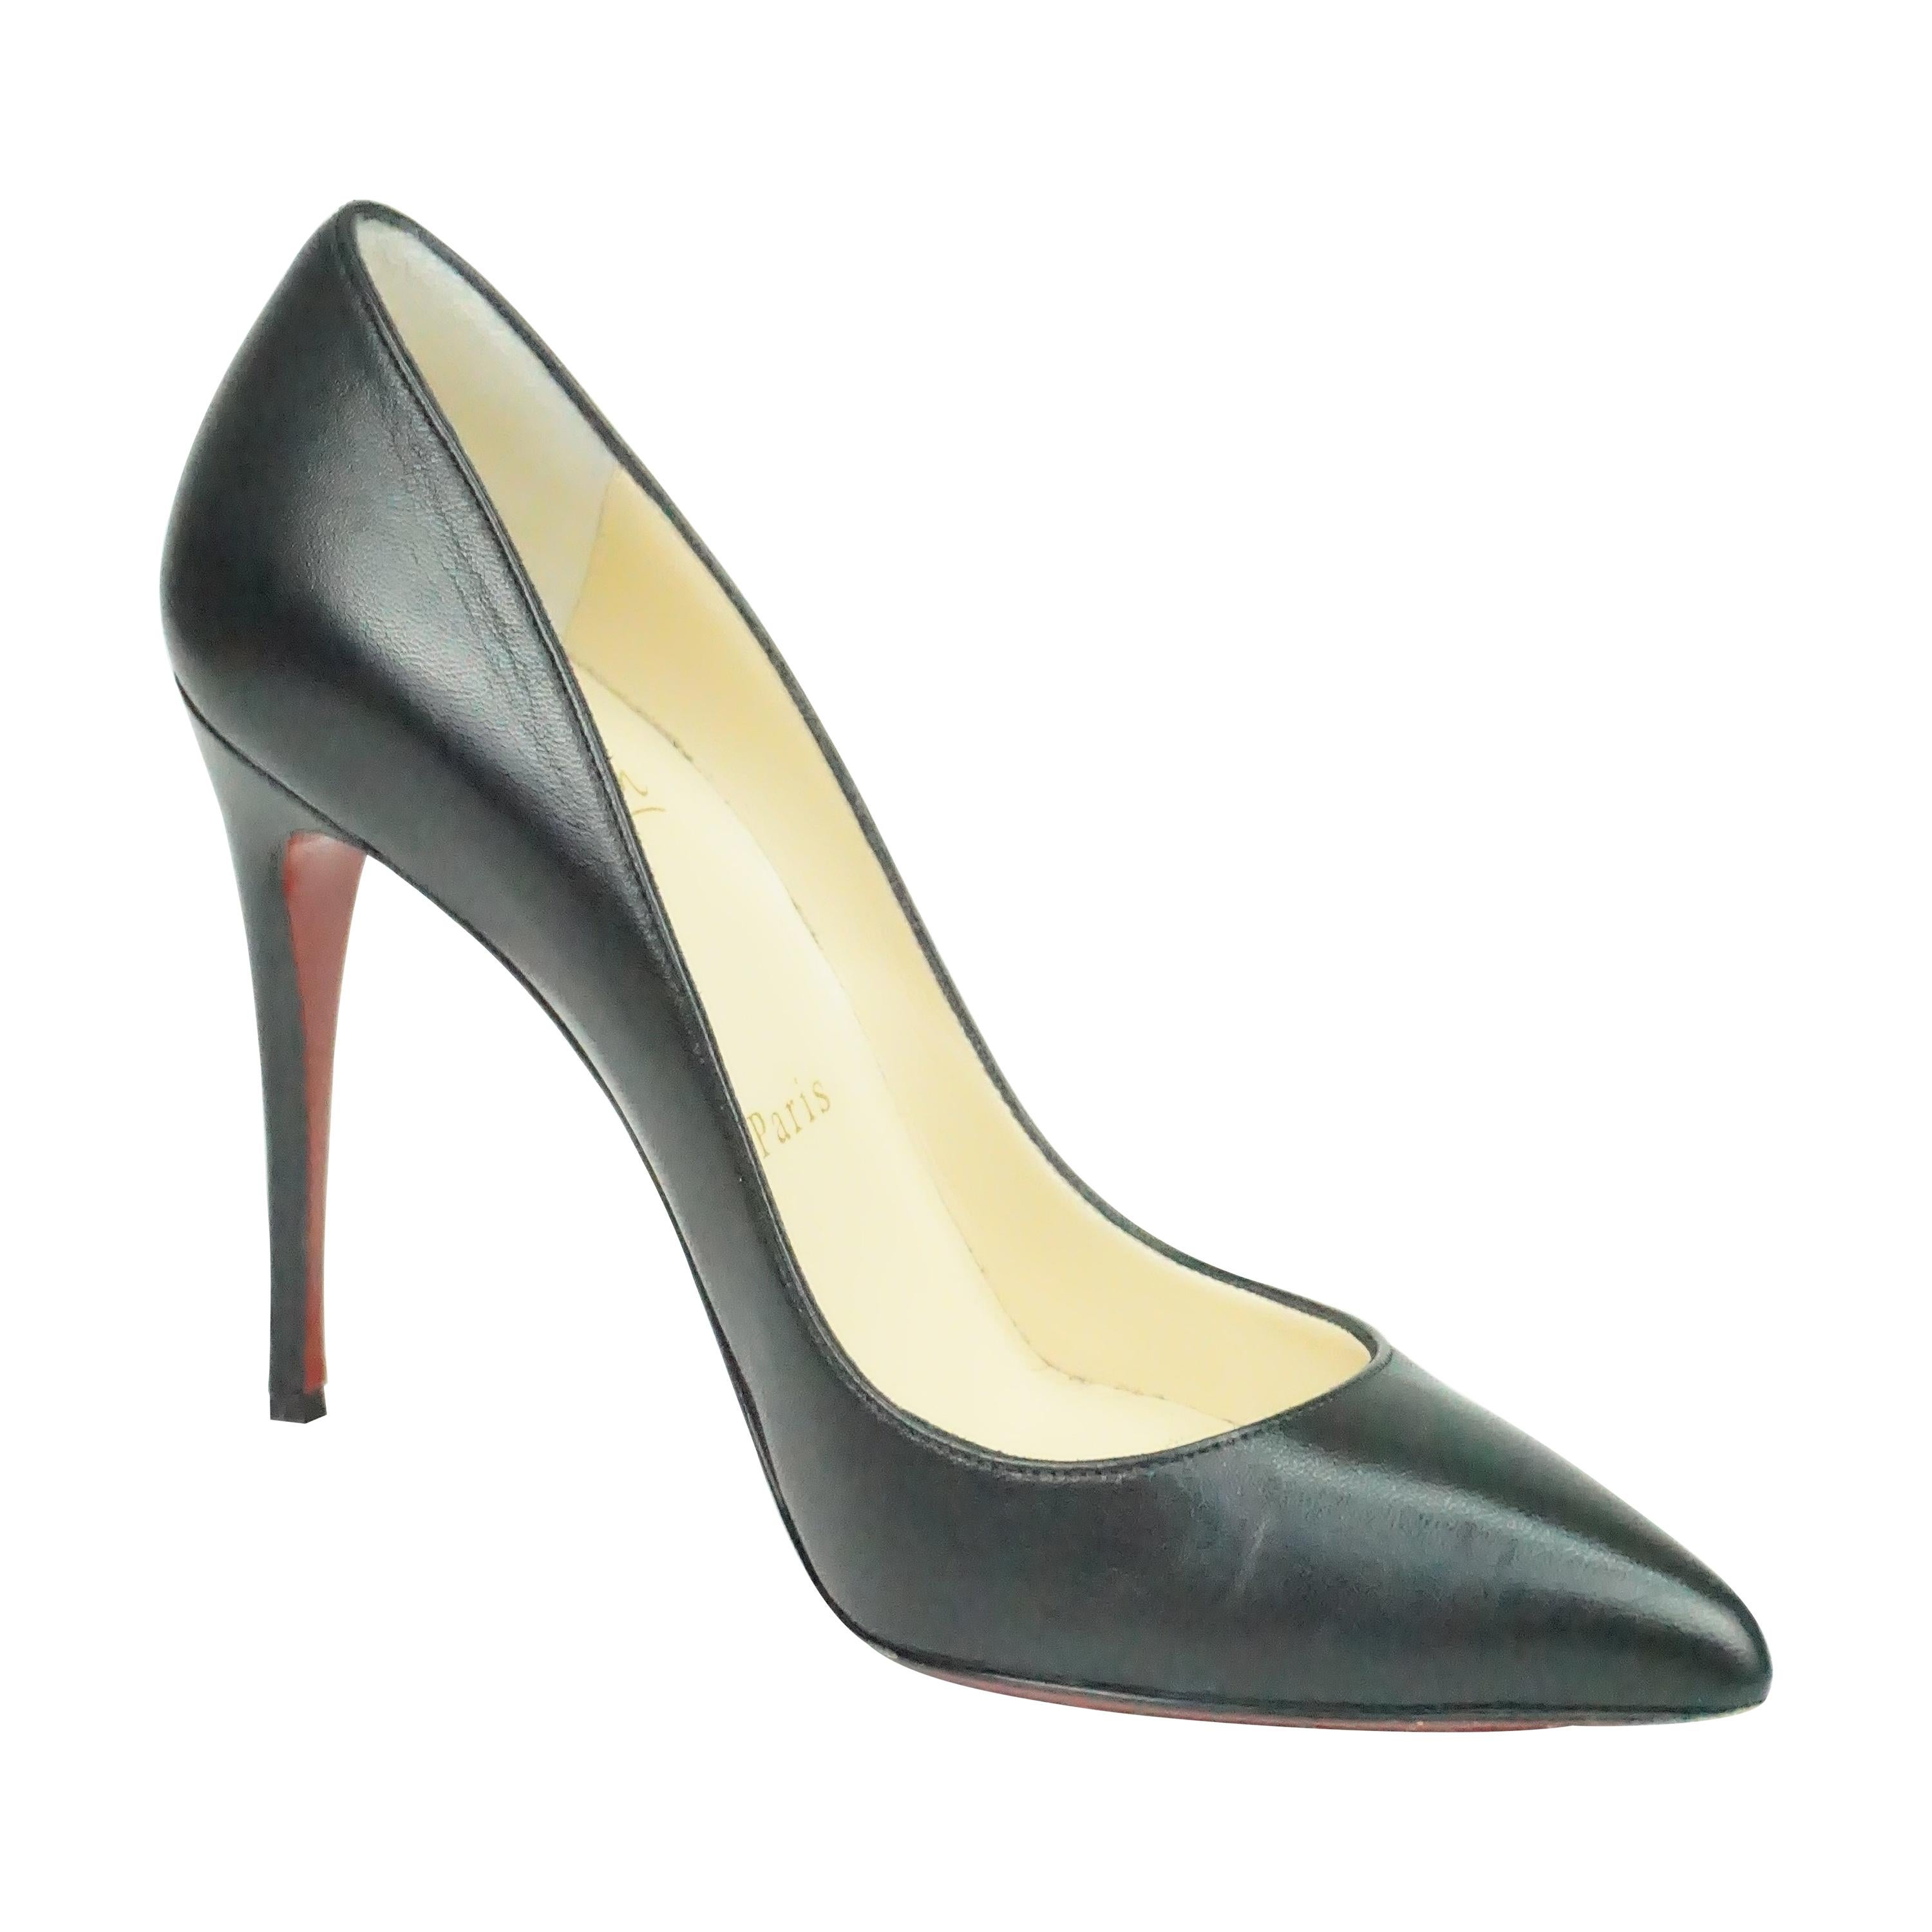 Christian Louboutin Black Leather Pumps w/ Pointed Toe - 36.5